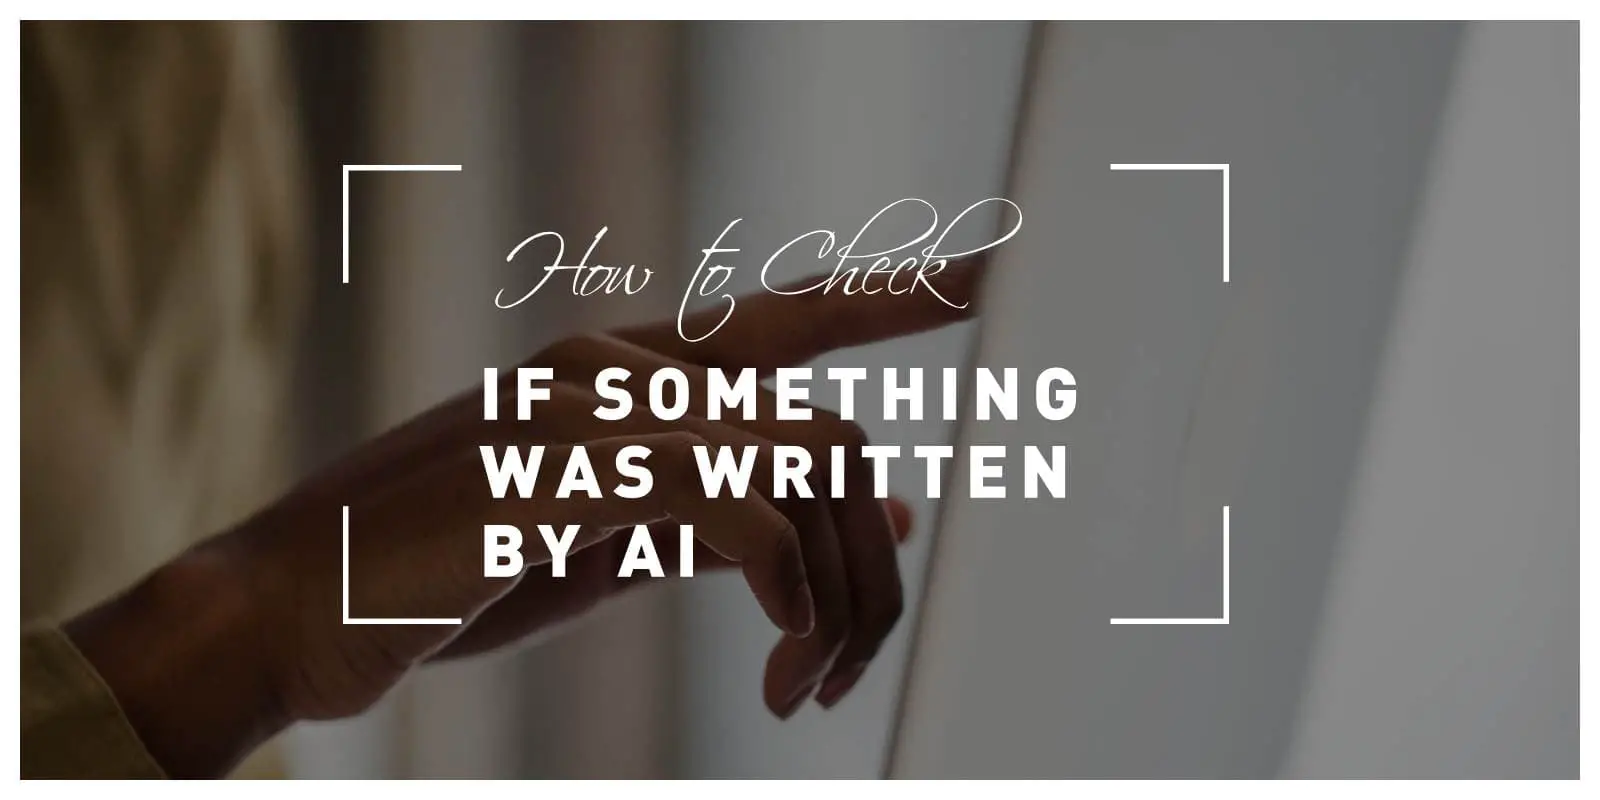 How to Check If Something Was Written by AI